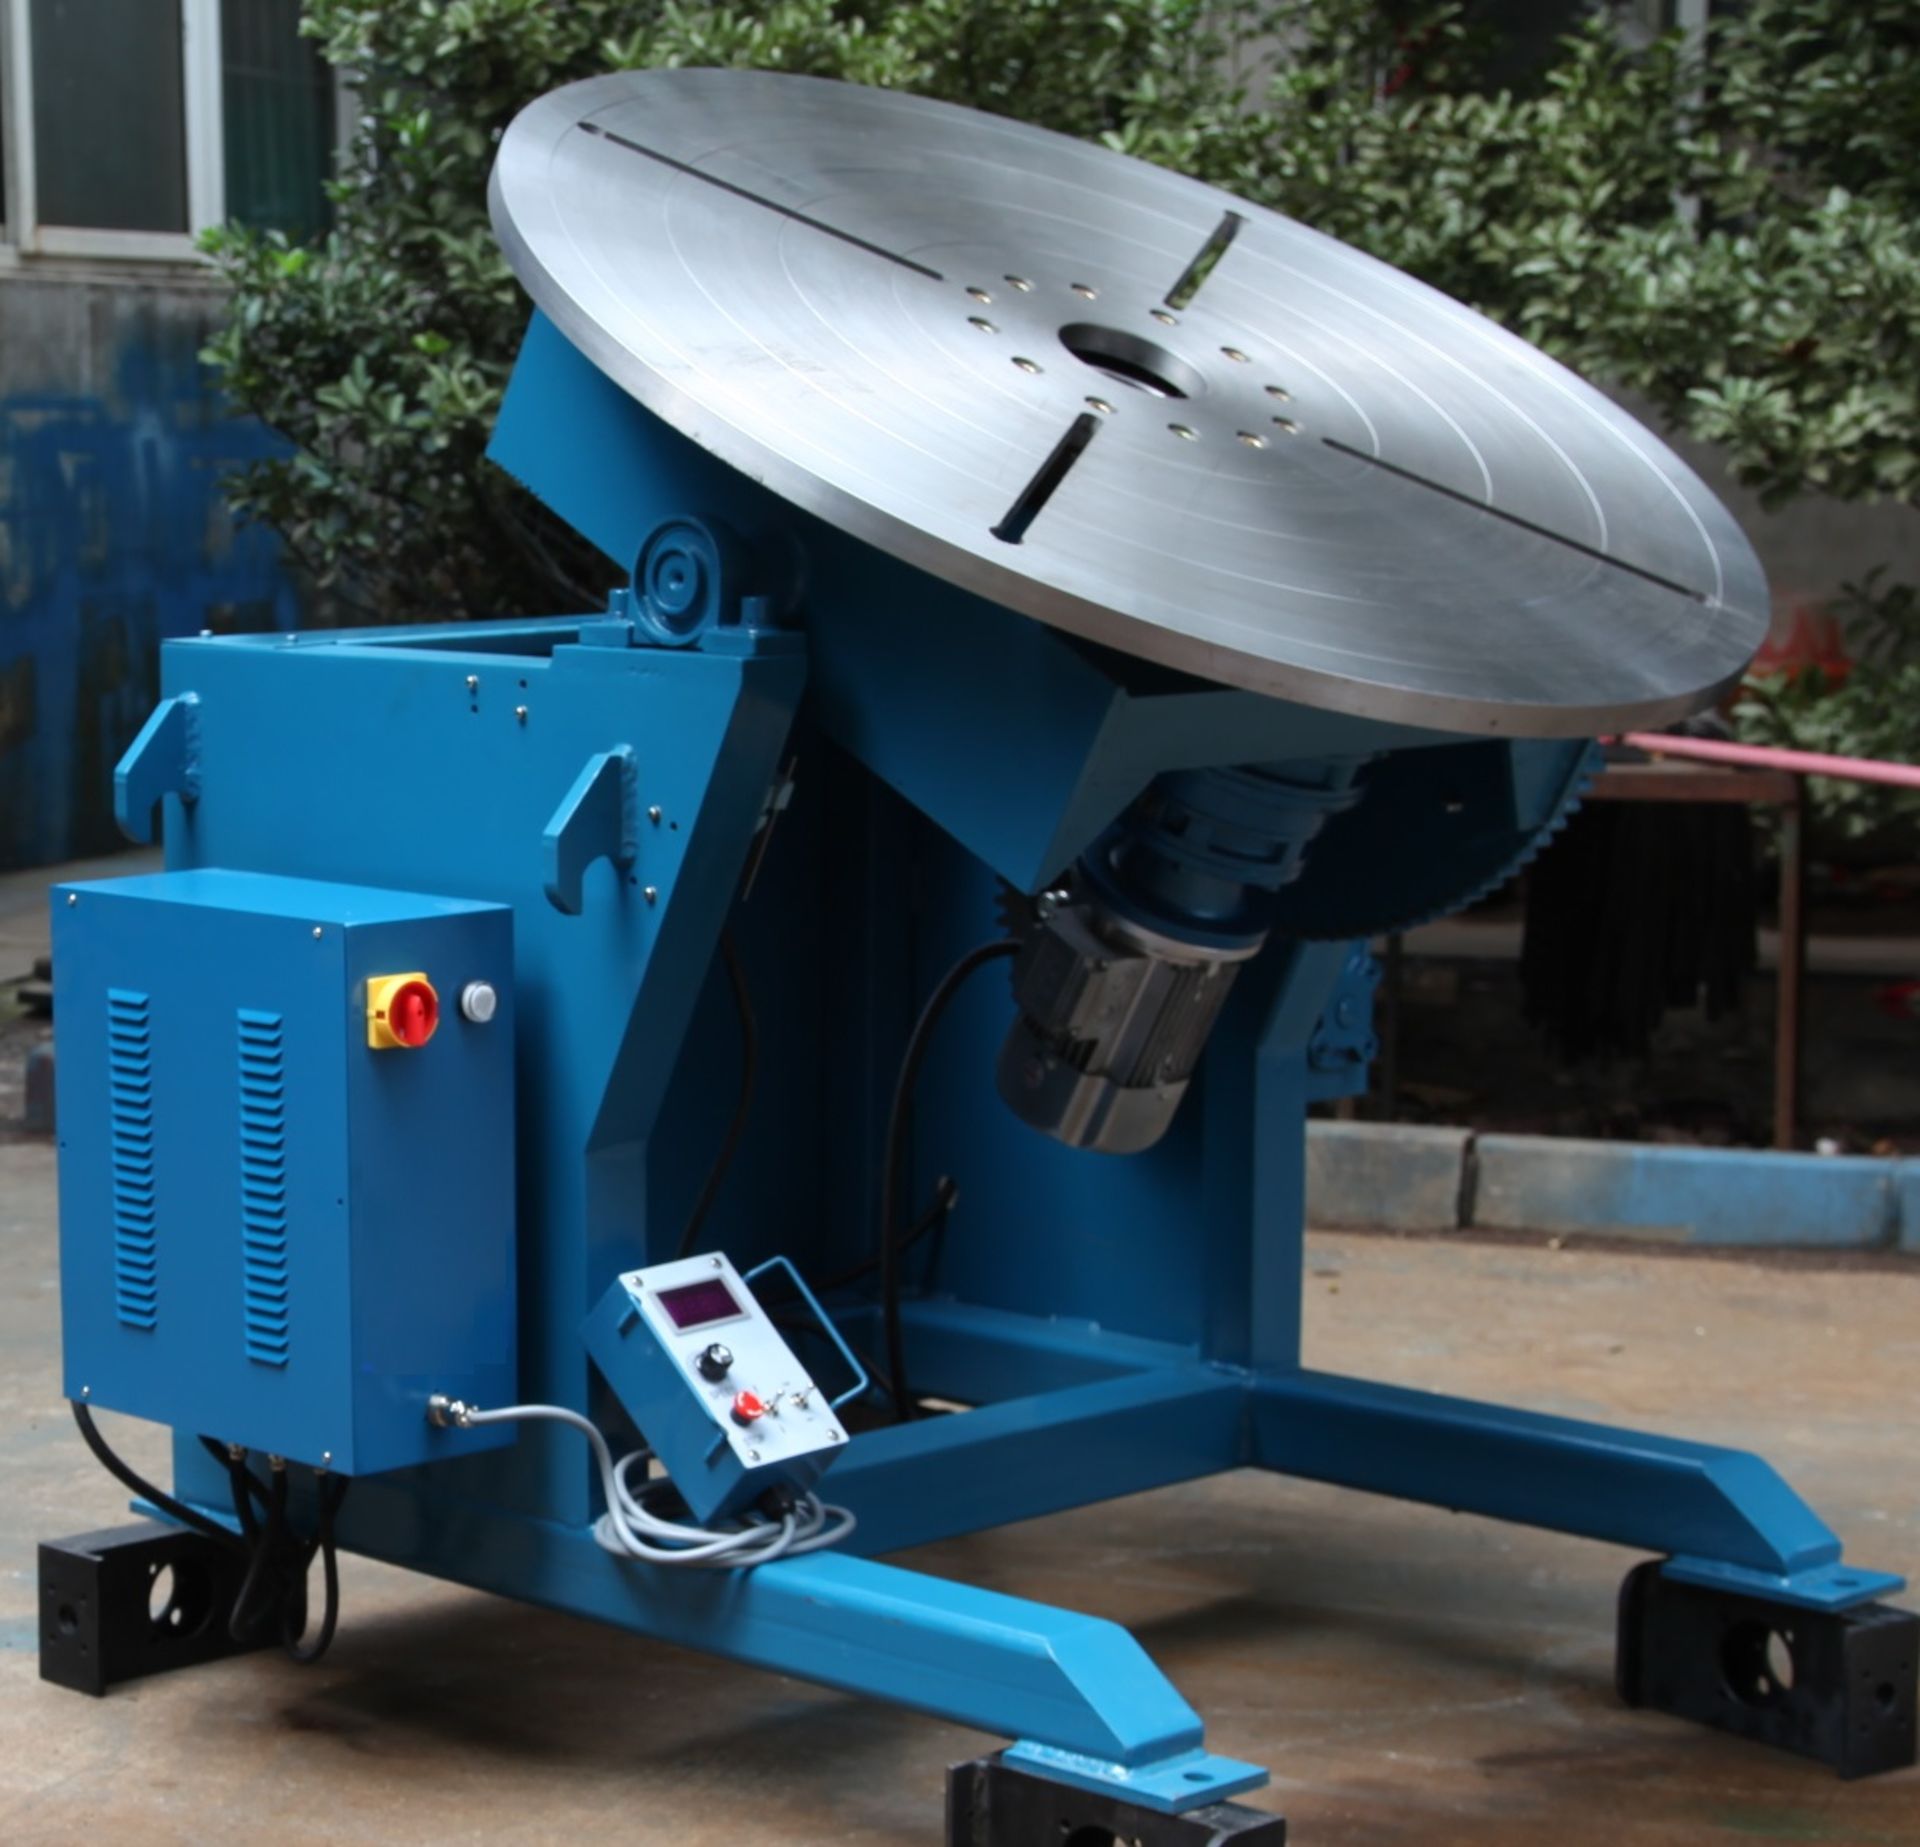 Mint Lacroix Welding Positioner 2000lbs / 900kg Capacity, Full rotation & tilt capability with